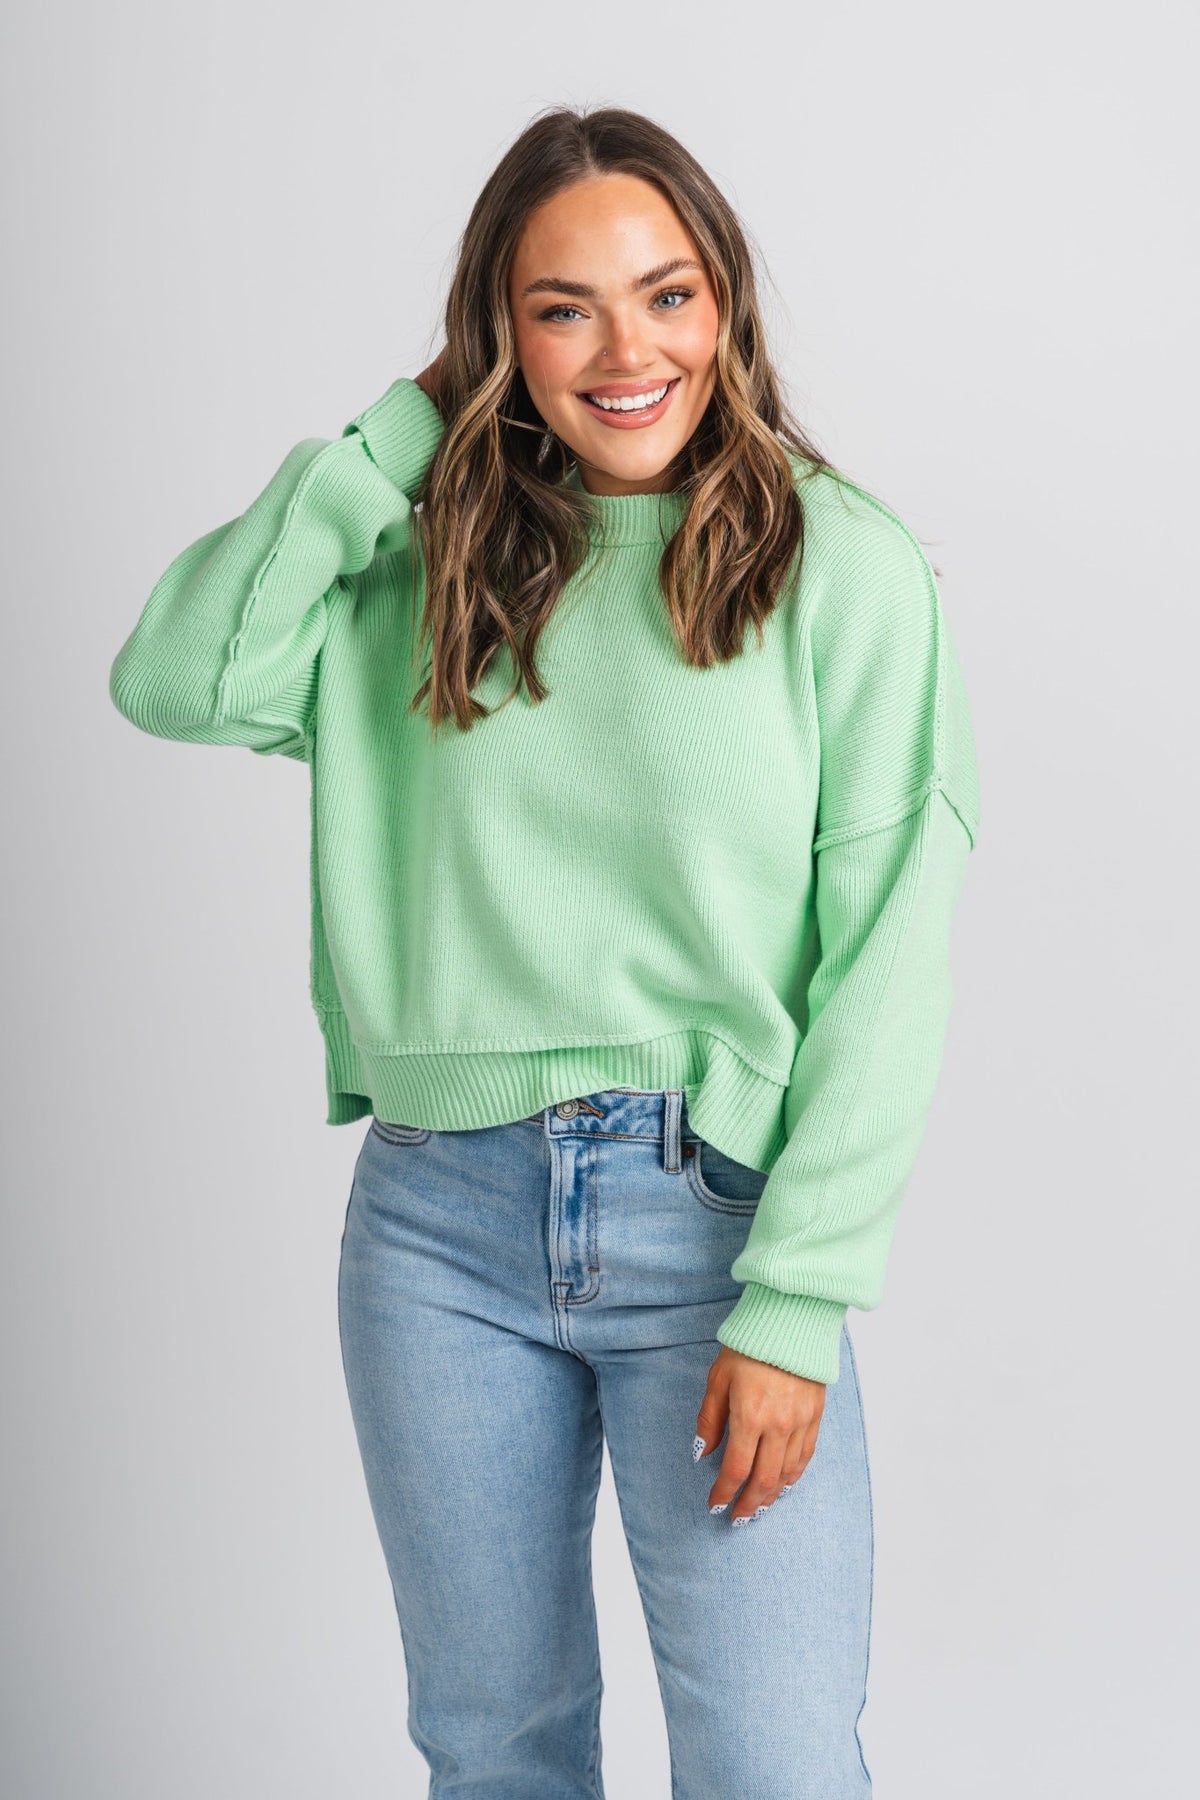 Leda chunky sweater mint - Stylish Sweaters - Cute Easter Outfits at Lush Fashion Lounge Boutique in Oklahoma